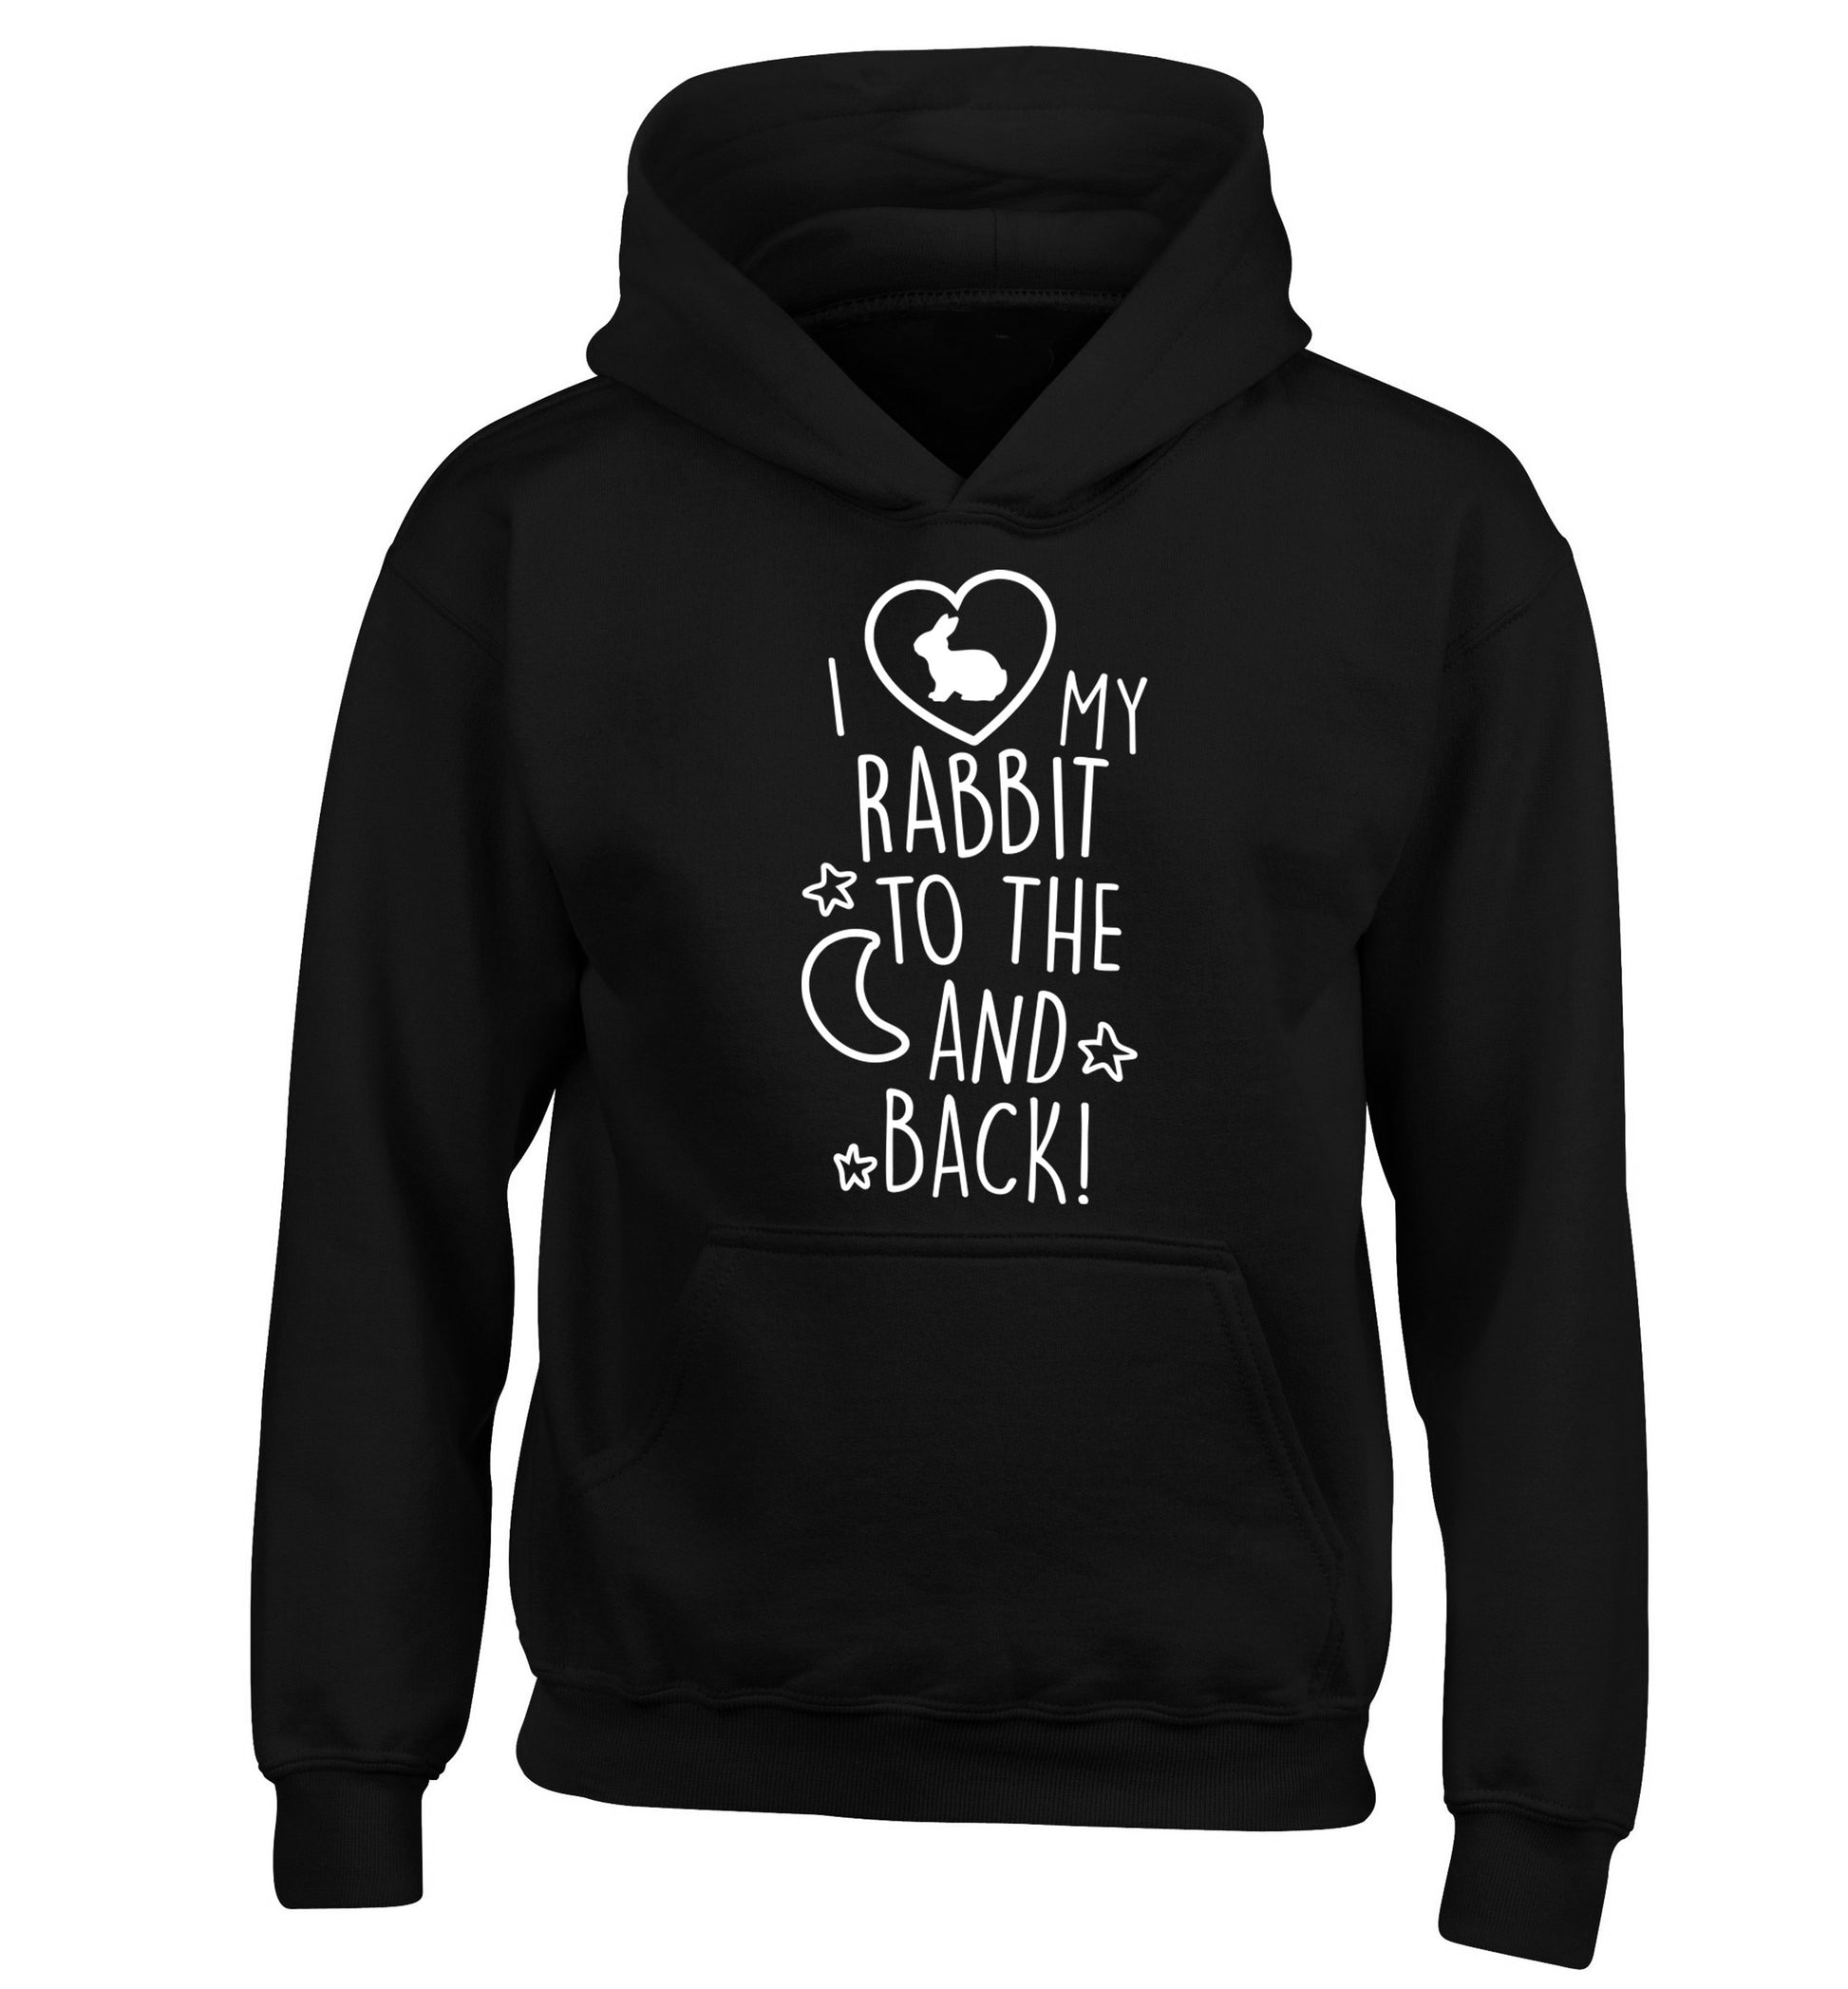 I love my rabbit to the moon and back children's black hoodie 12-14 Years